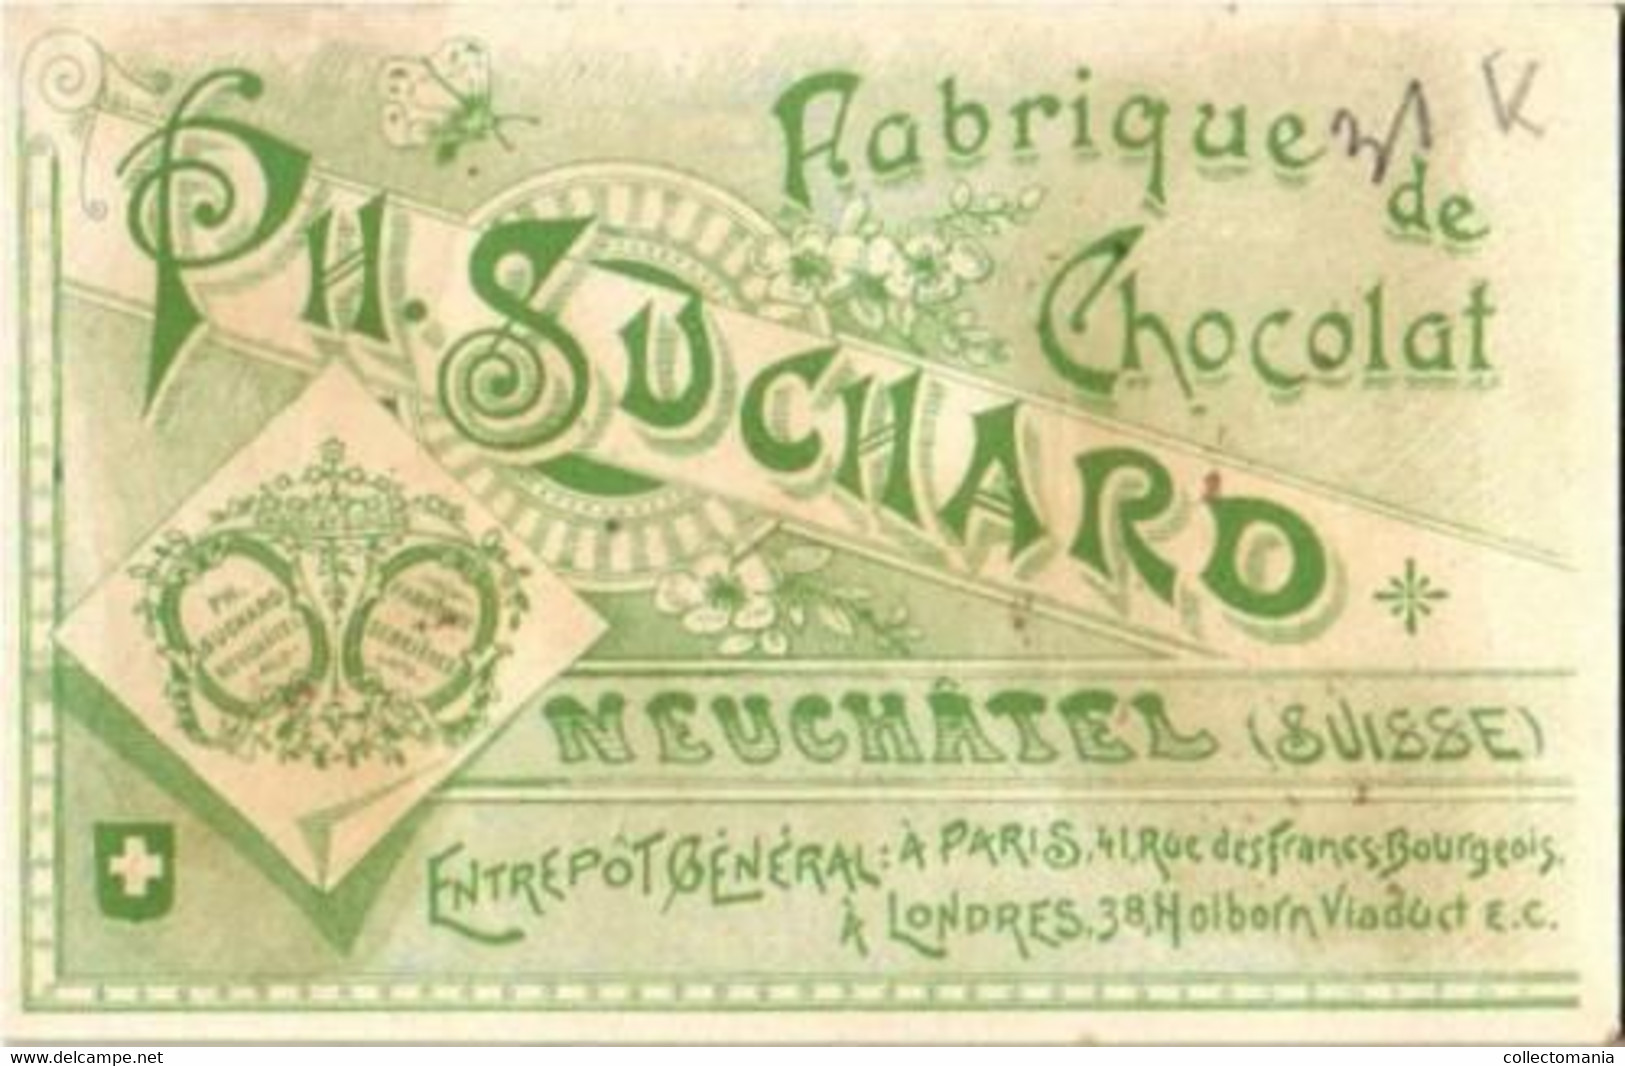 6 chromo lithography cards travel with chocolate SUCHARD, set 31B, anno 1892 VG suisse chocolade